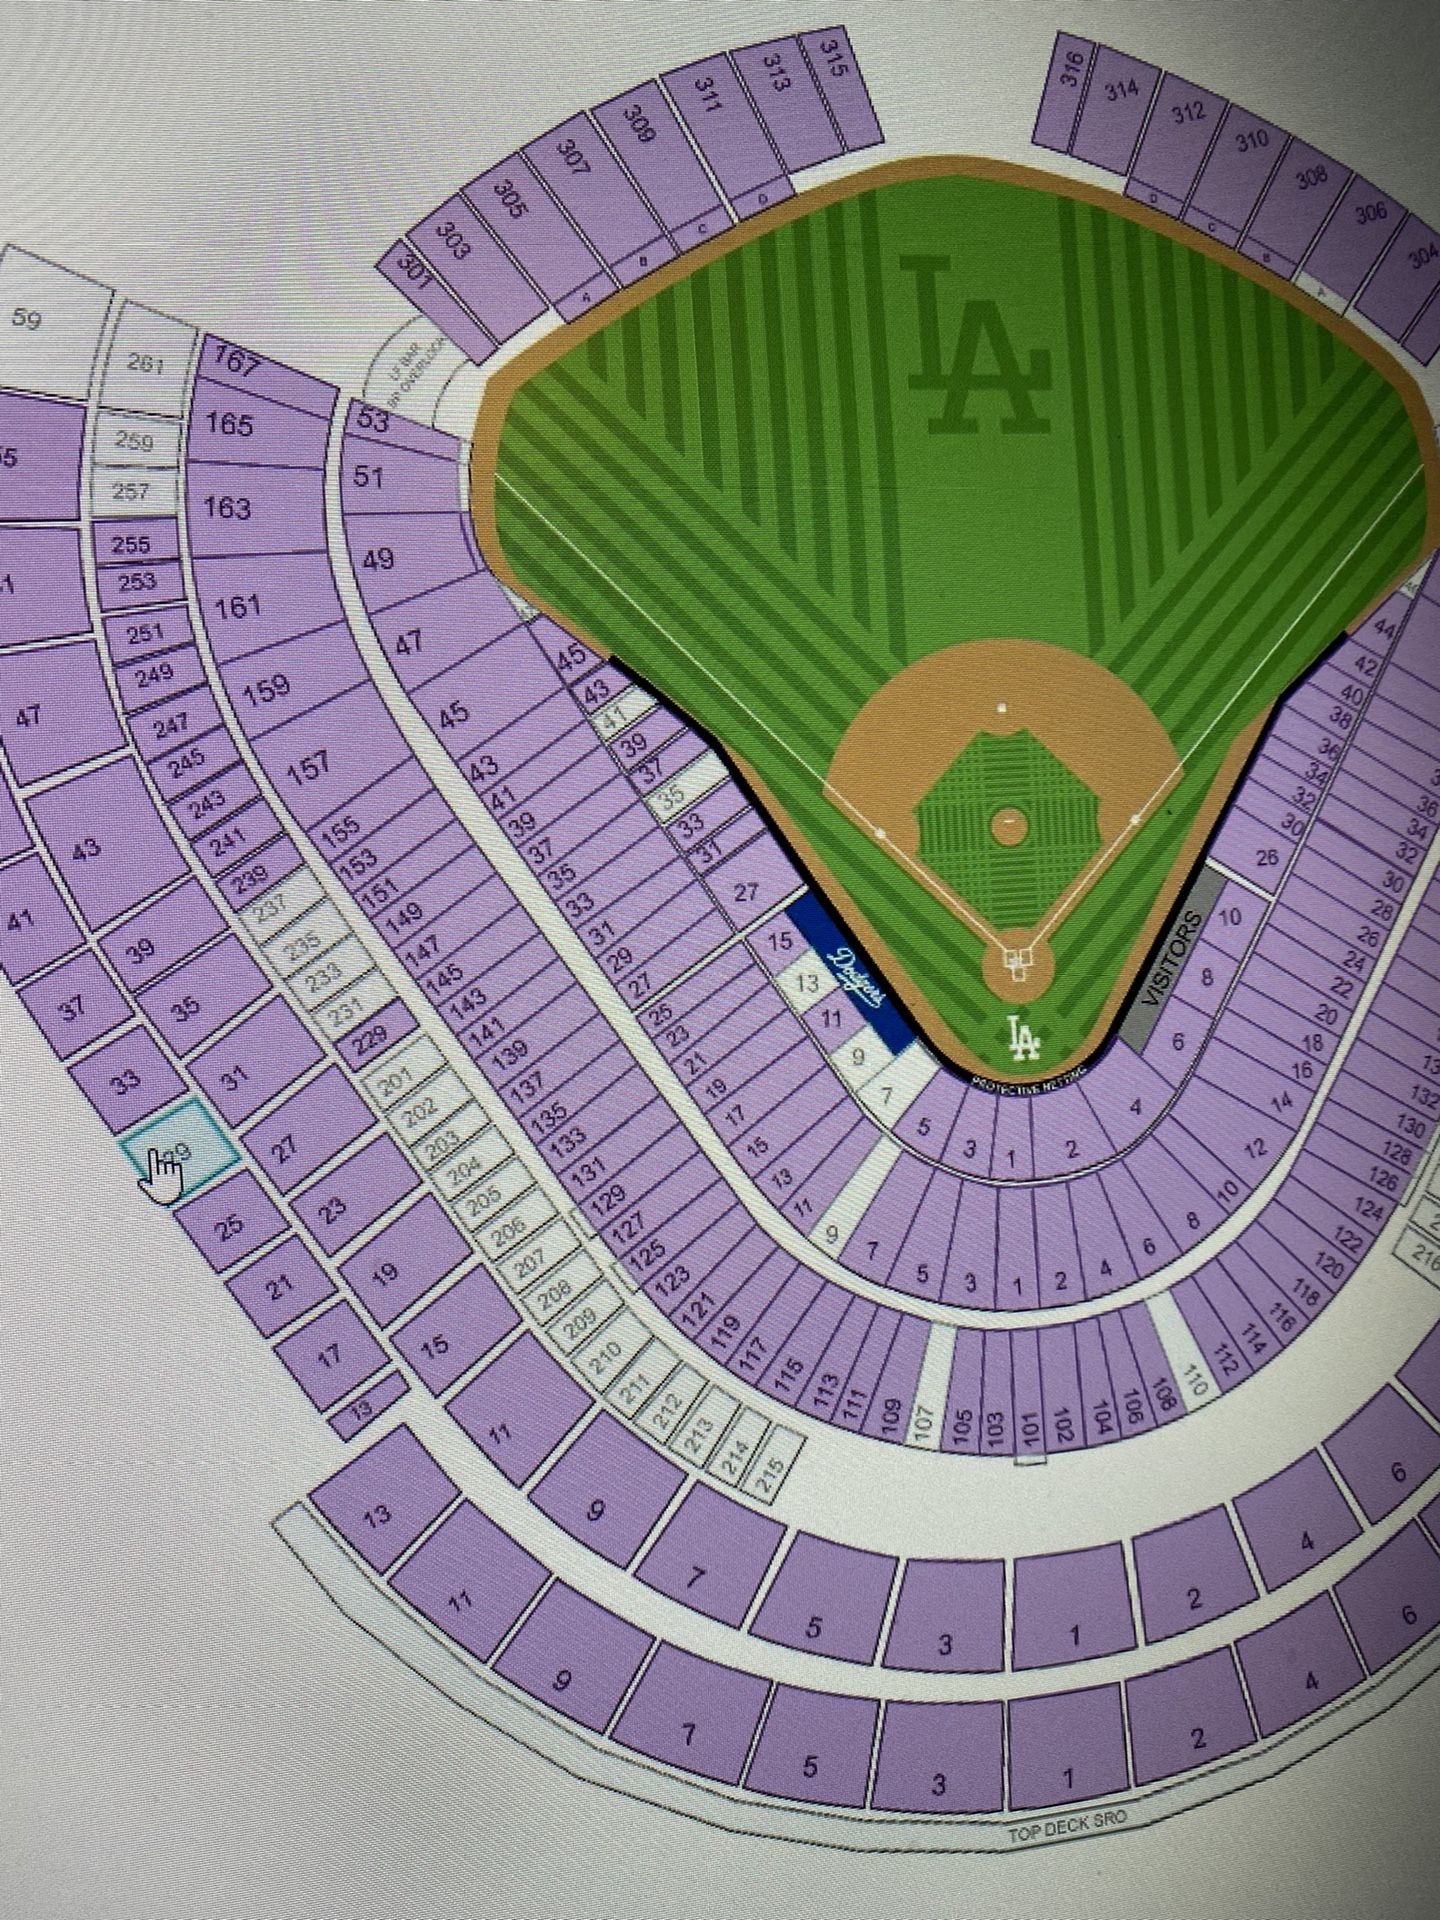 Dodgers  Vs Braves  Game 3 4 Tickets 